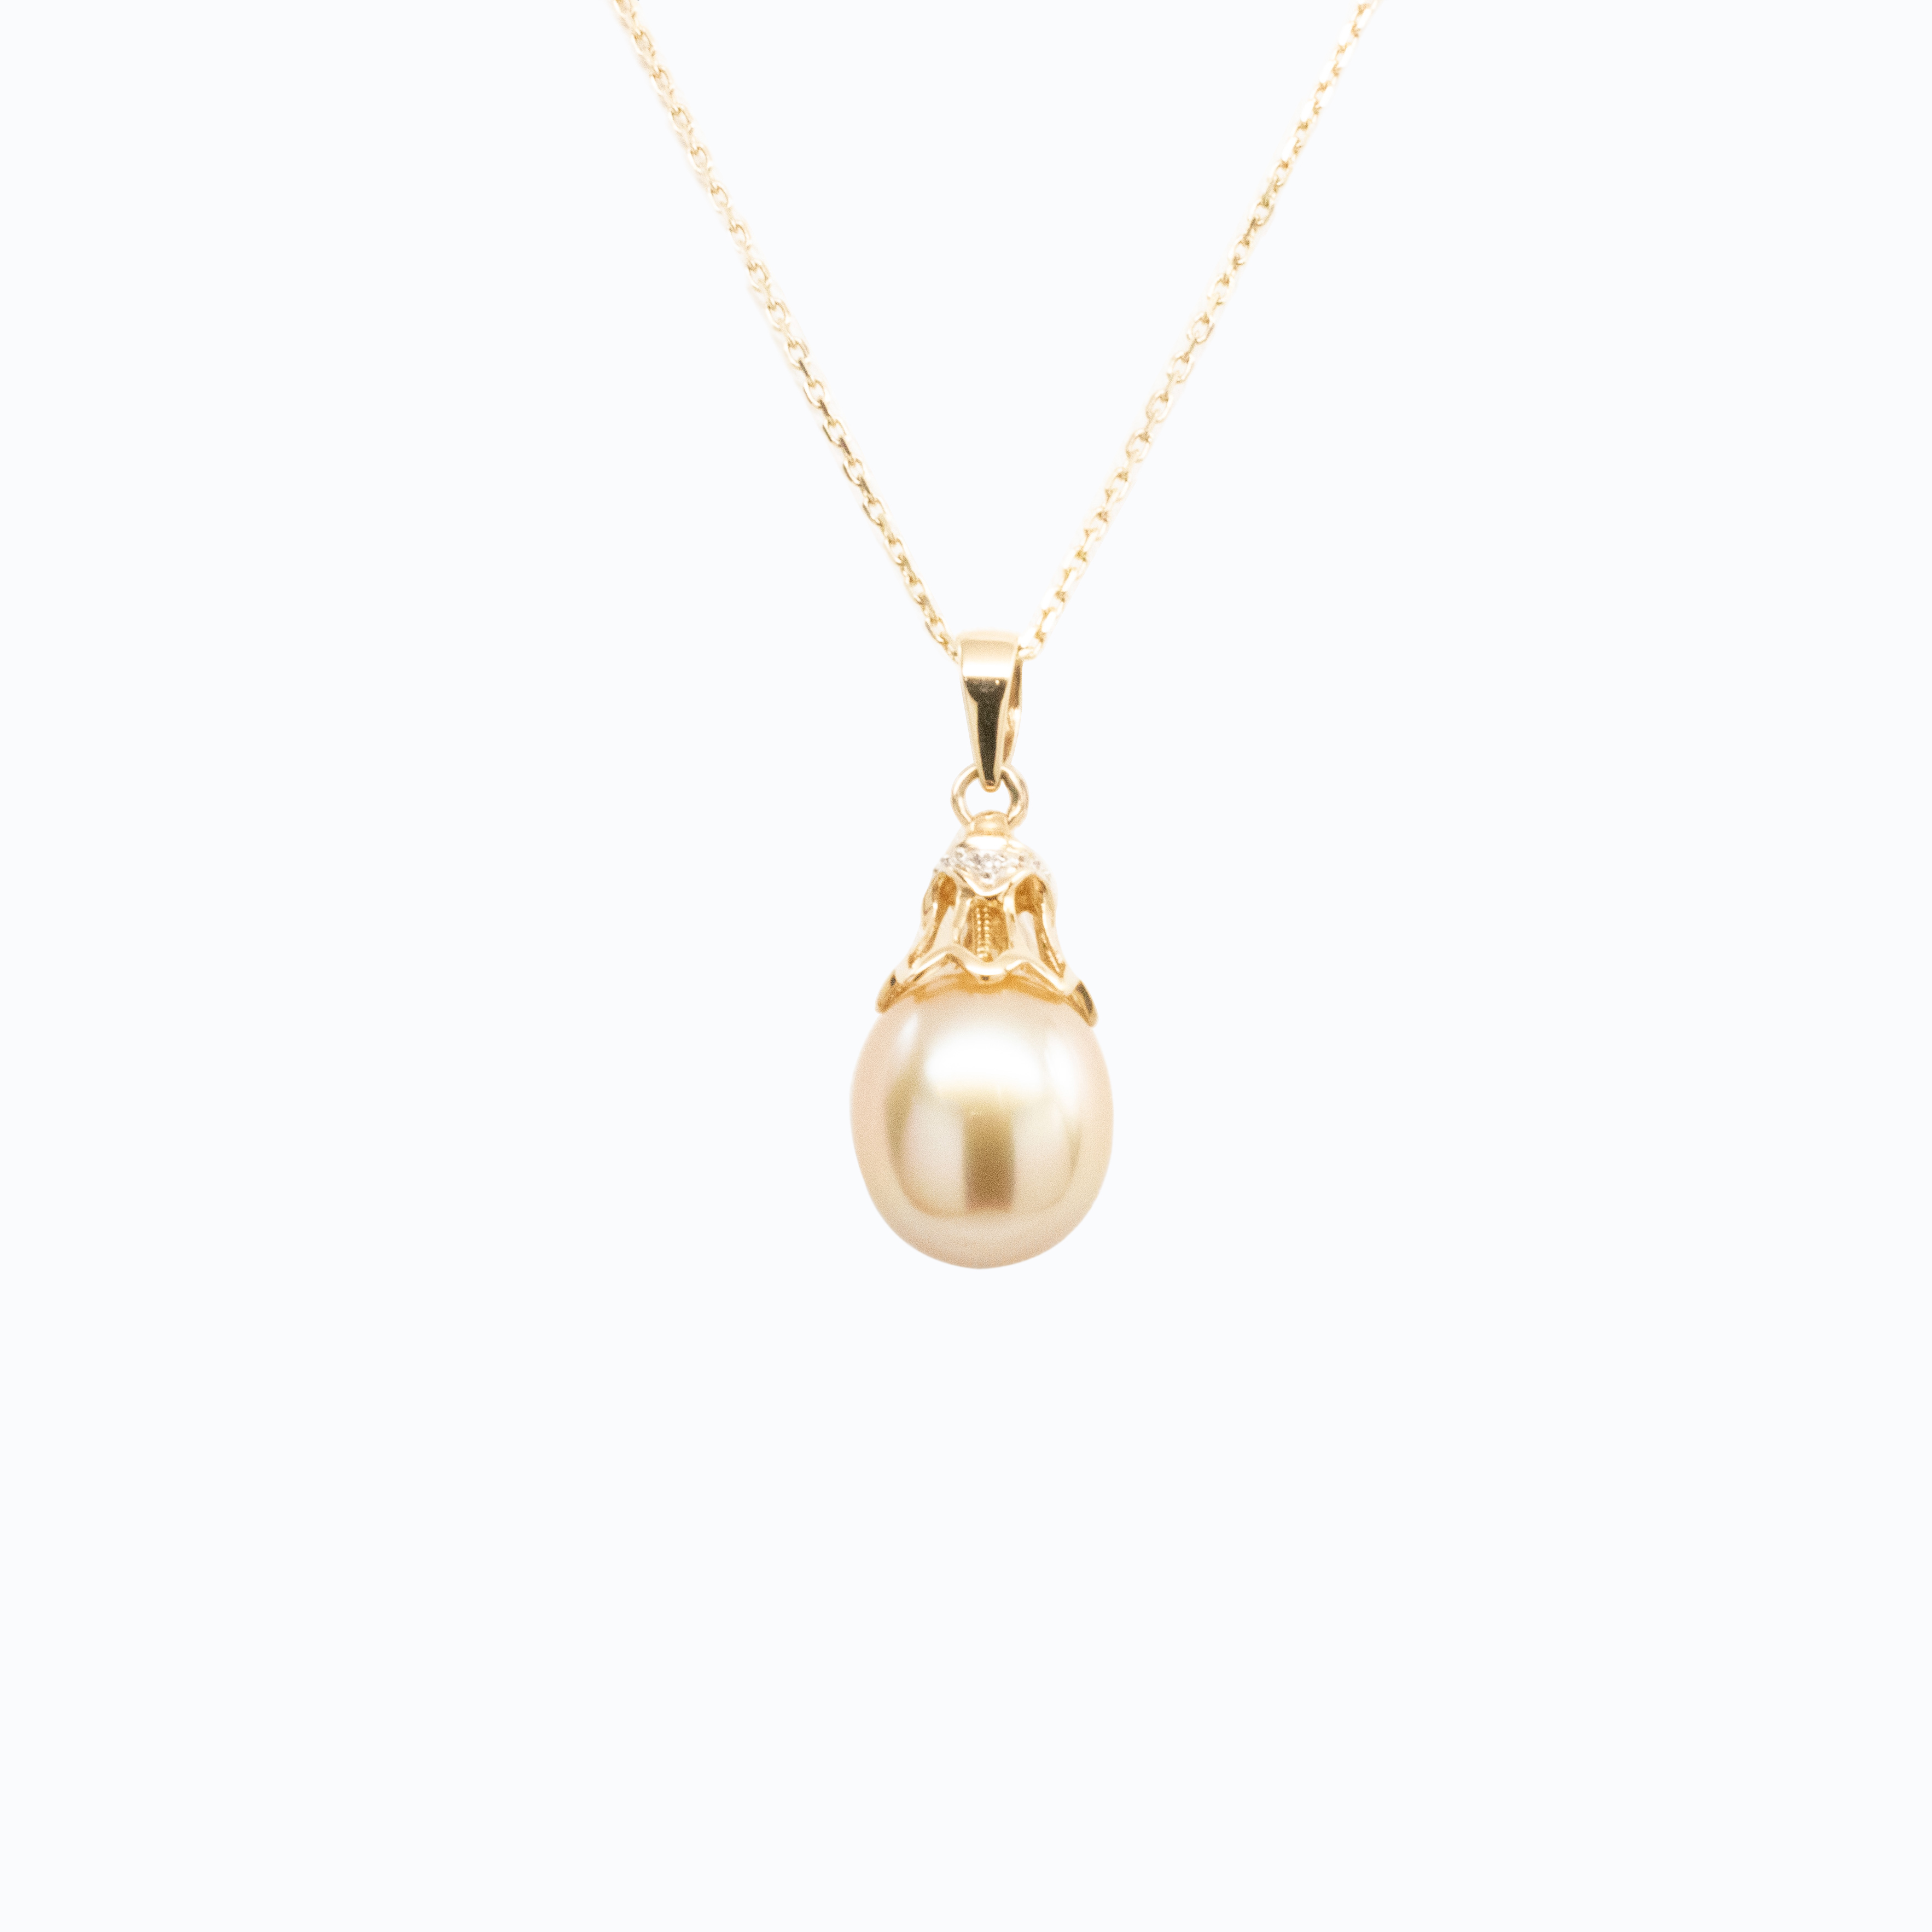 Oval Pearl Pendant with Diamond Accents, 14k Yellow Gold